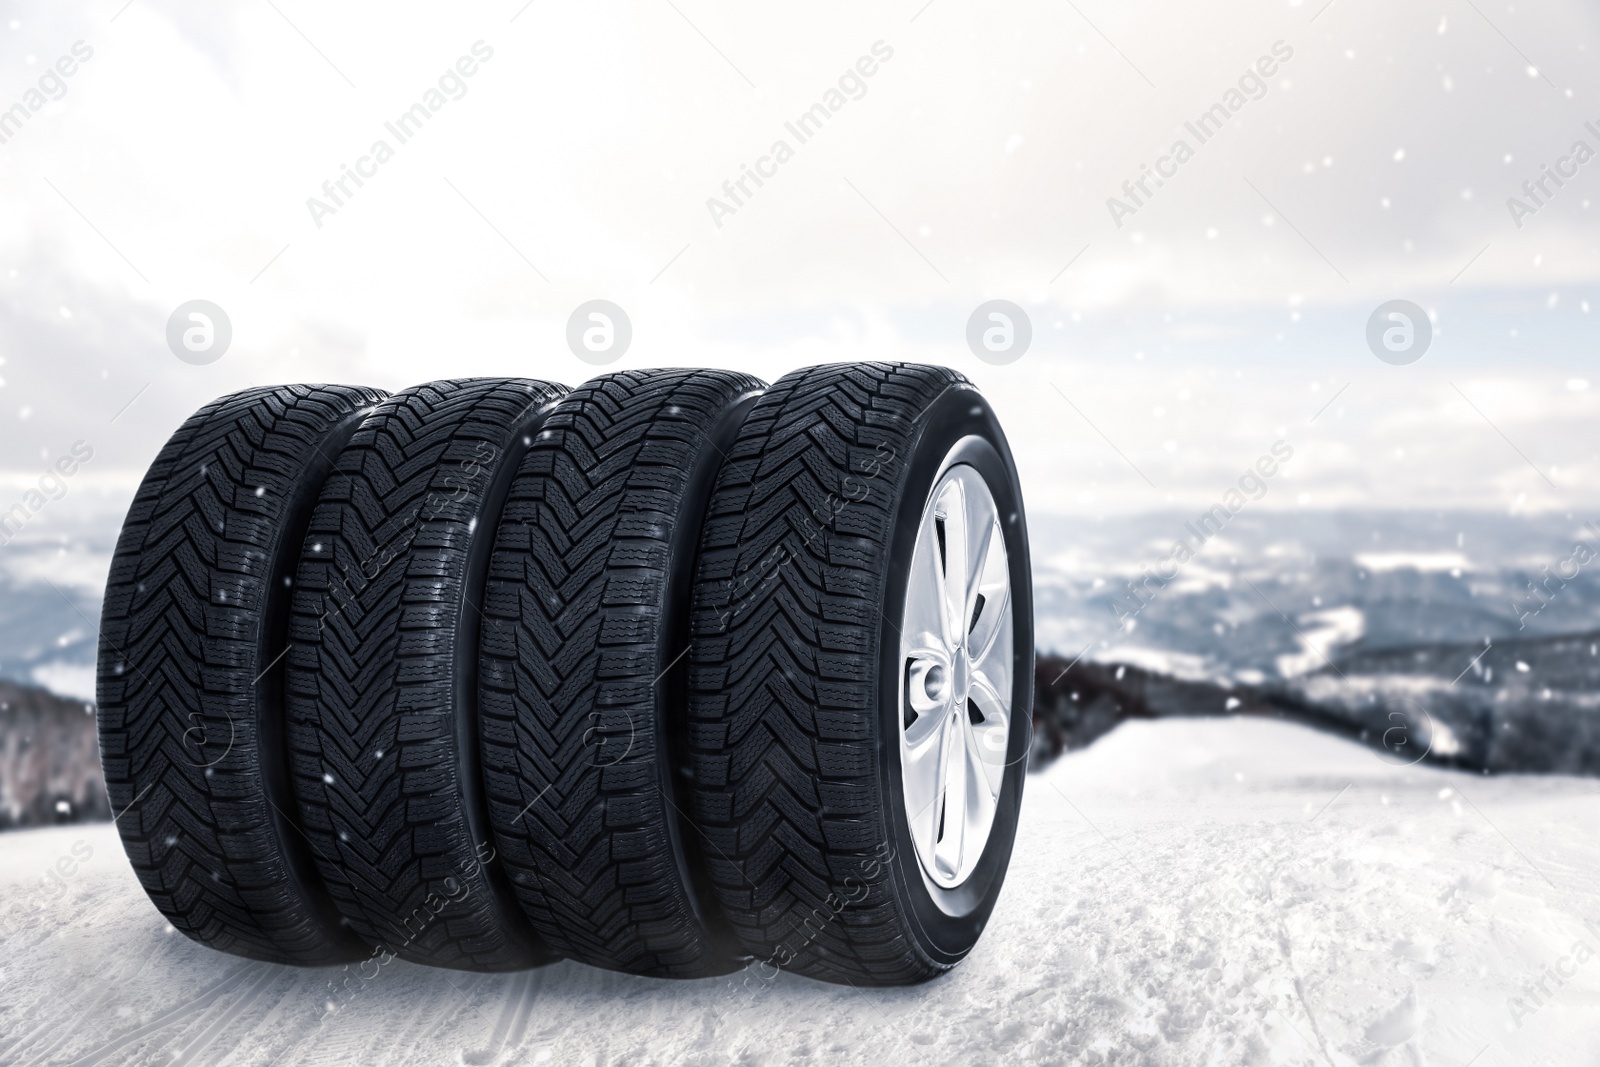 Image of Set of wheels with winter tires outdoors on snow